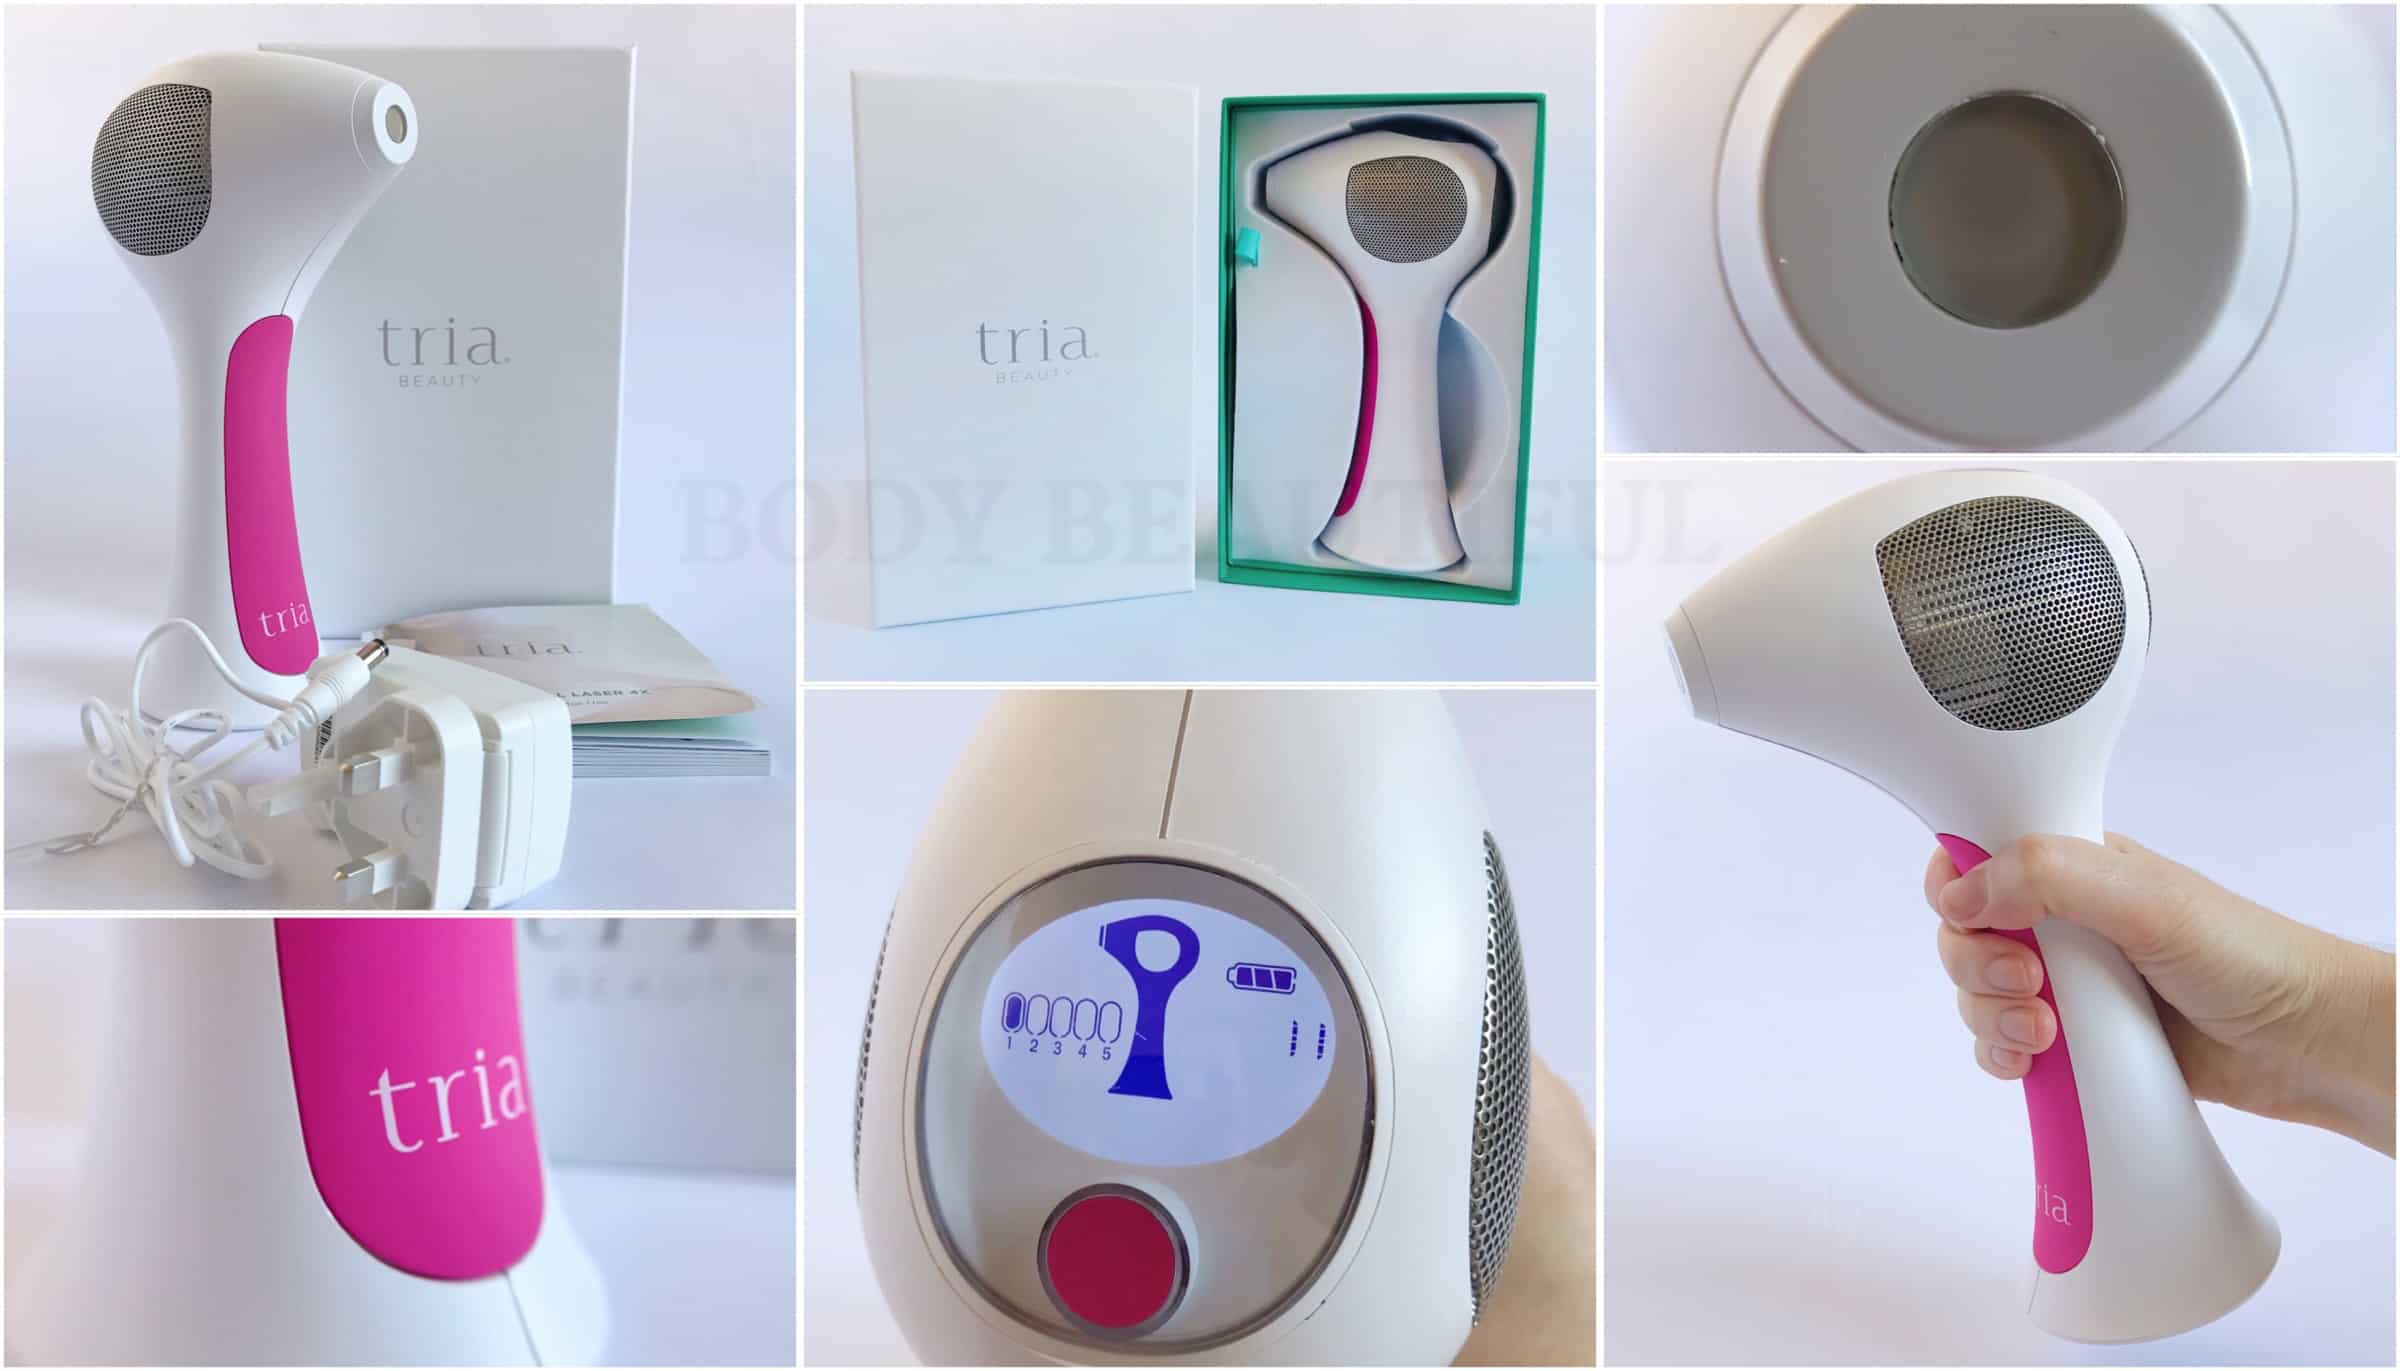 close Expanding spring Tria 4X laser hair removal review & video - most powerful